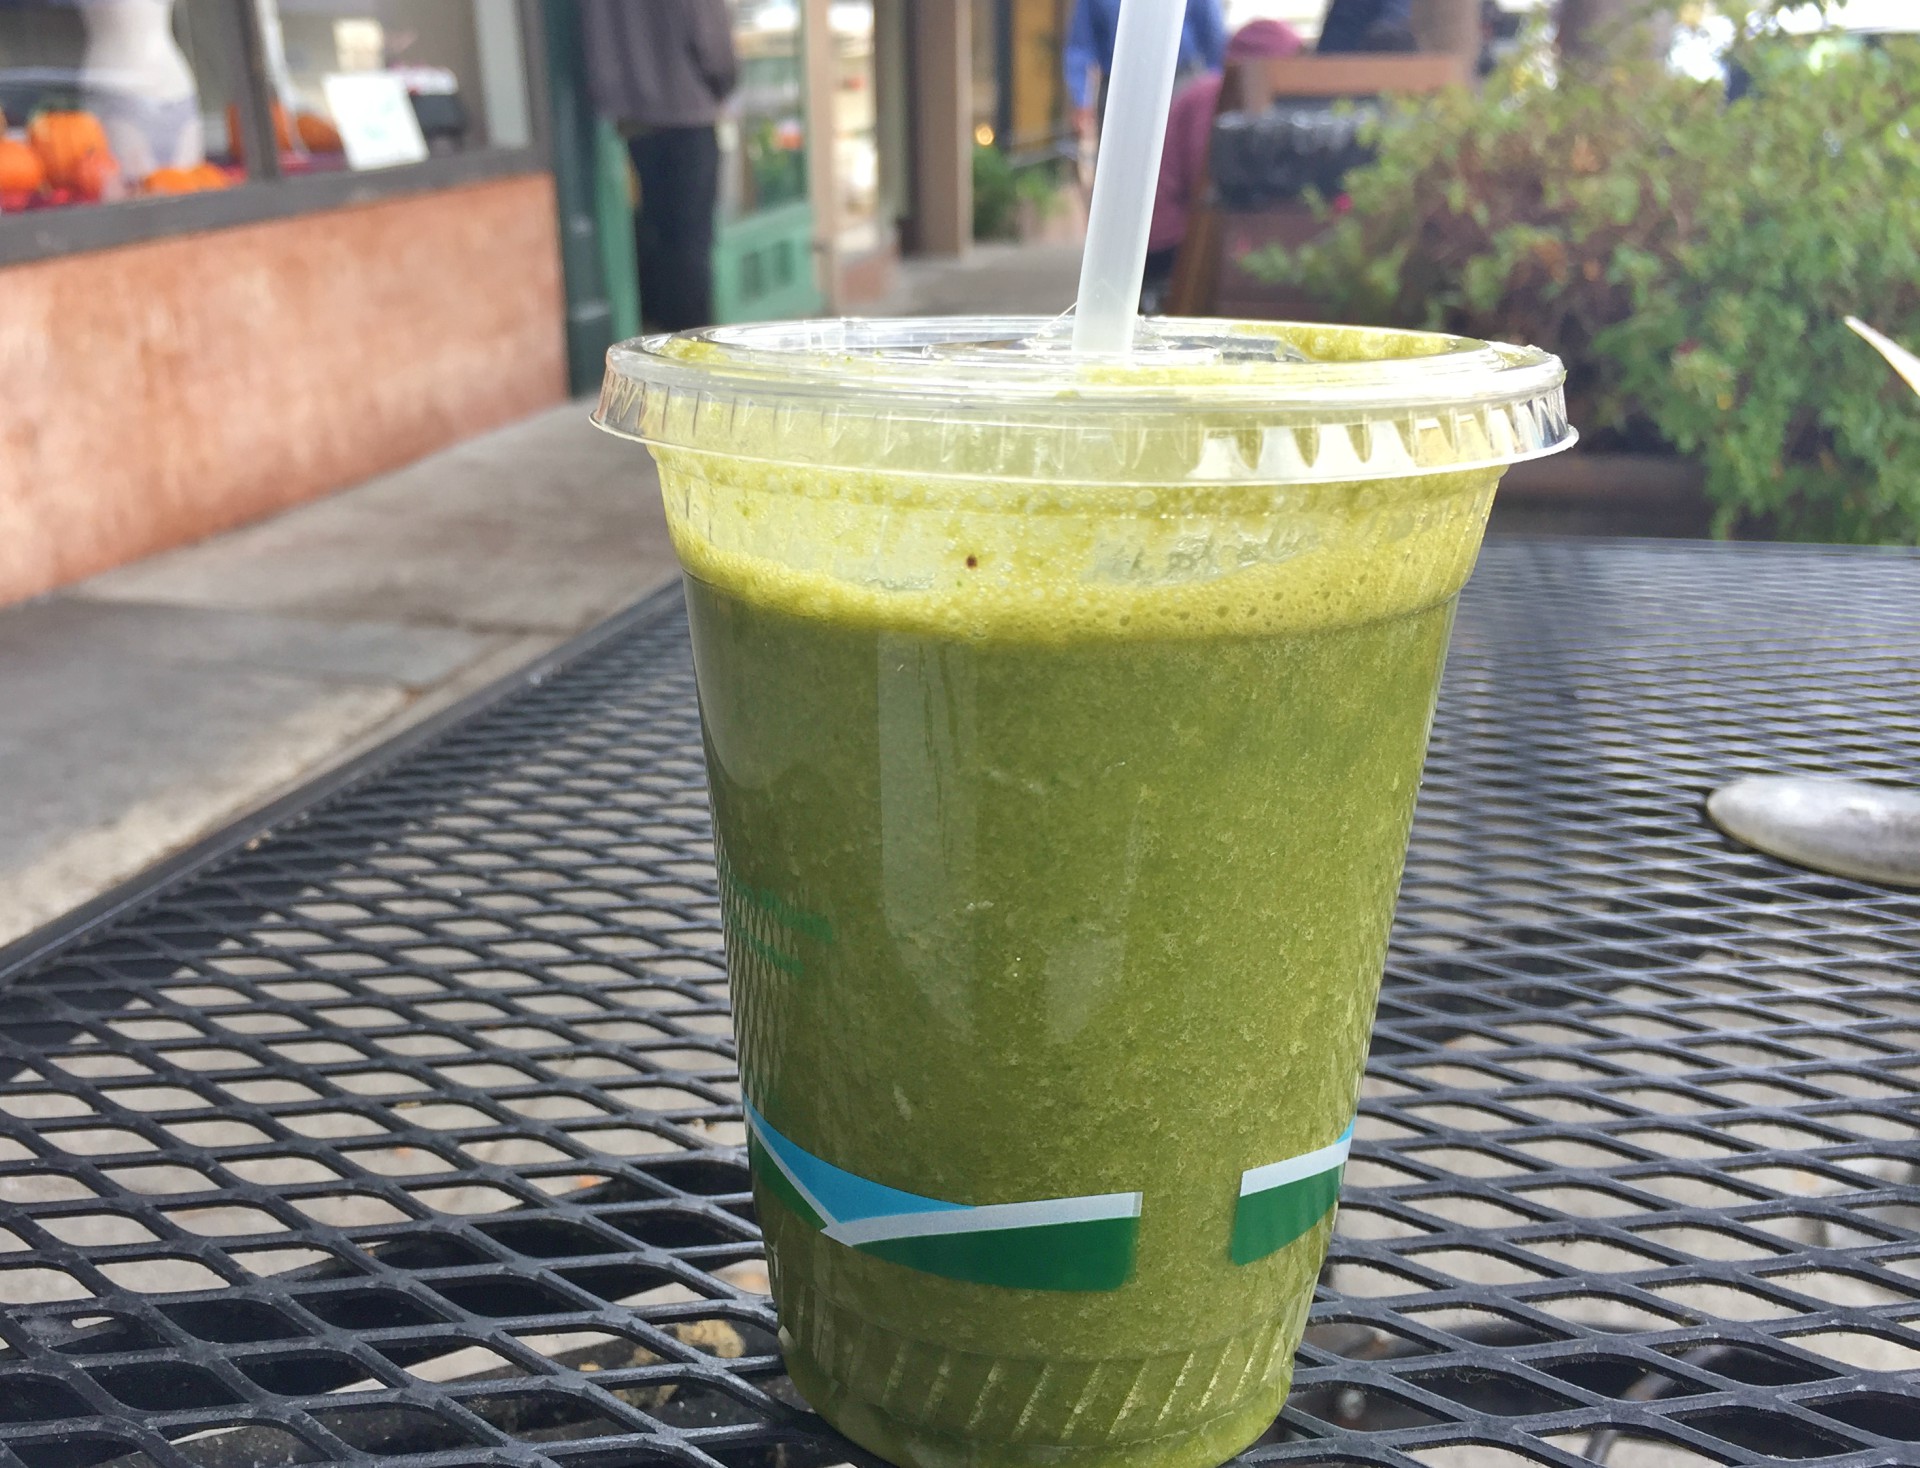 The JBC Kale smoothie from the Juice Bar Collective in North Berkeley.